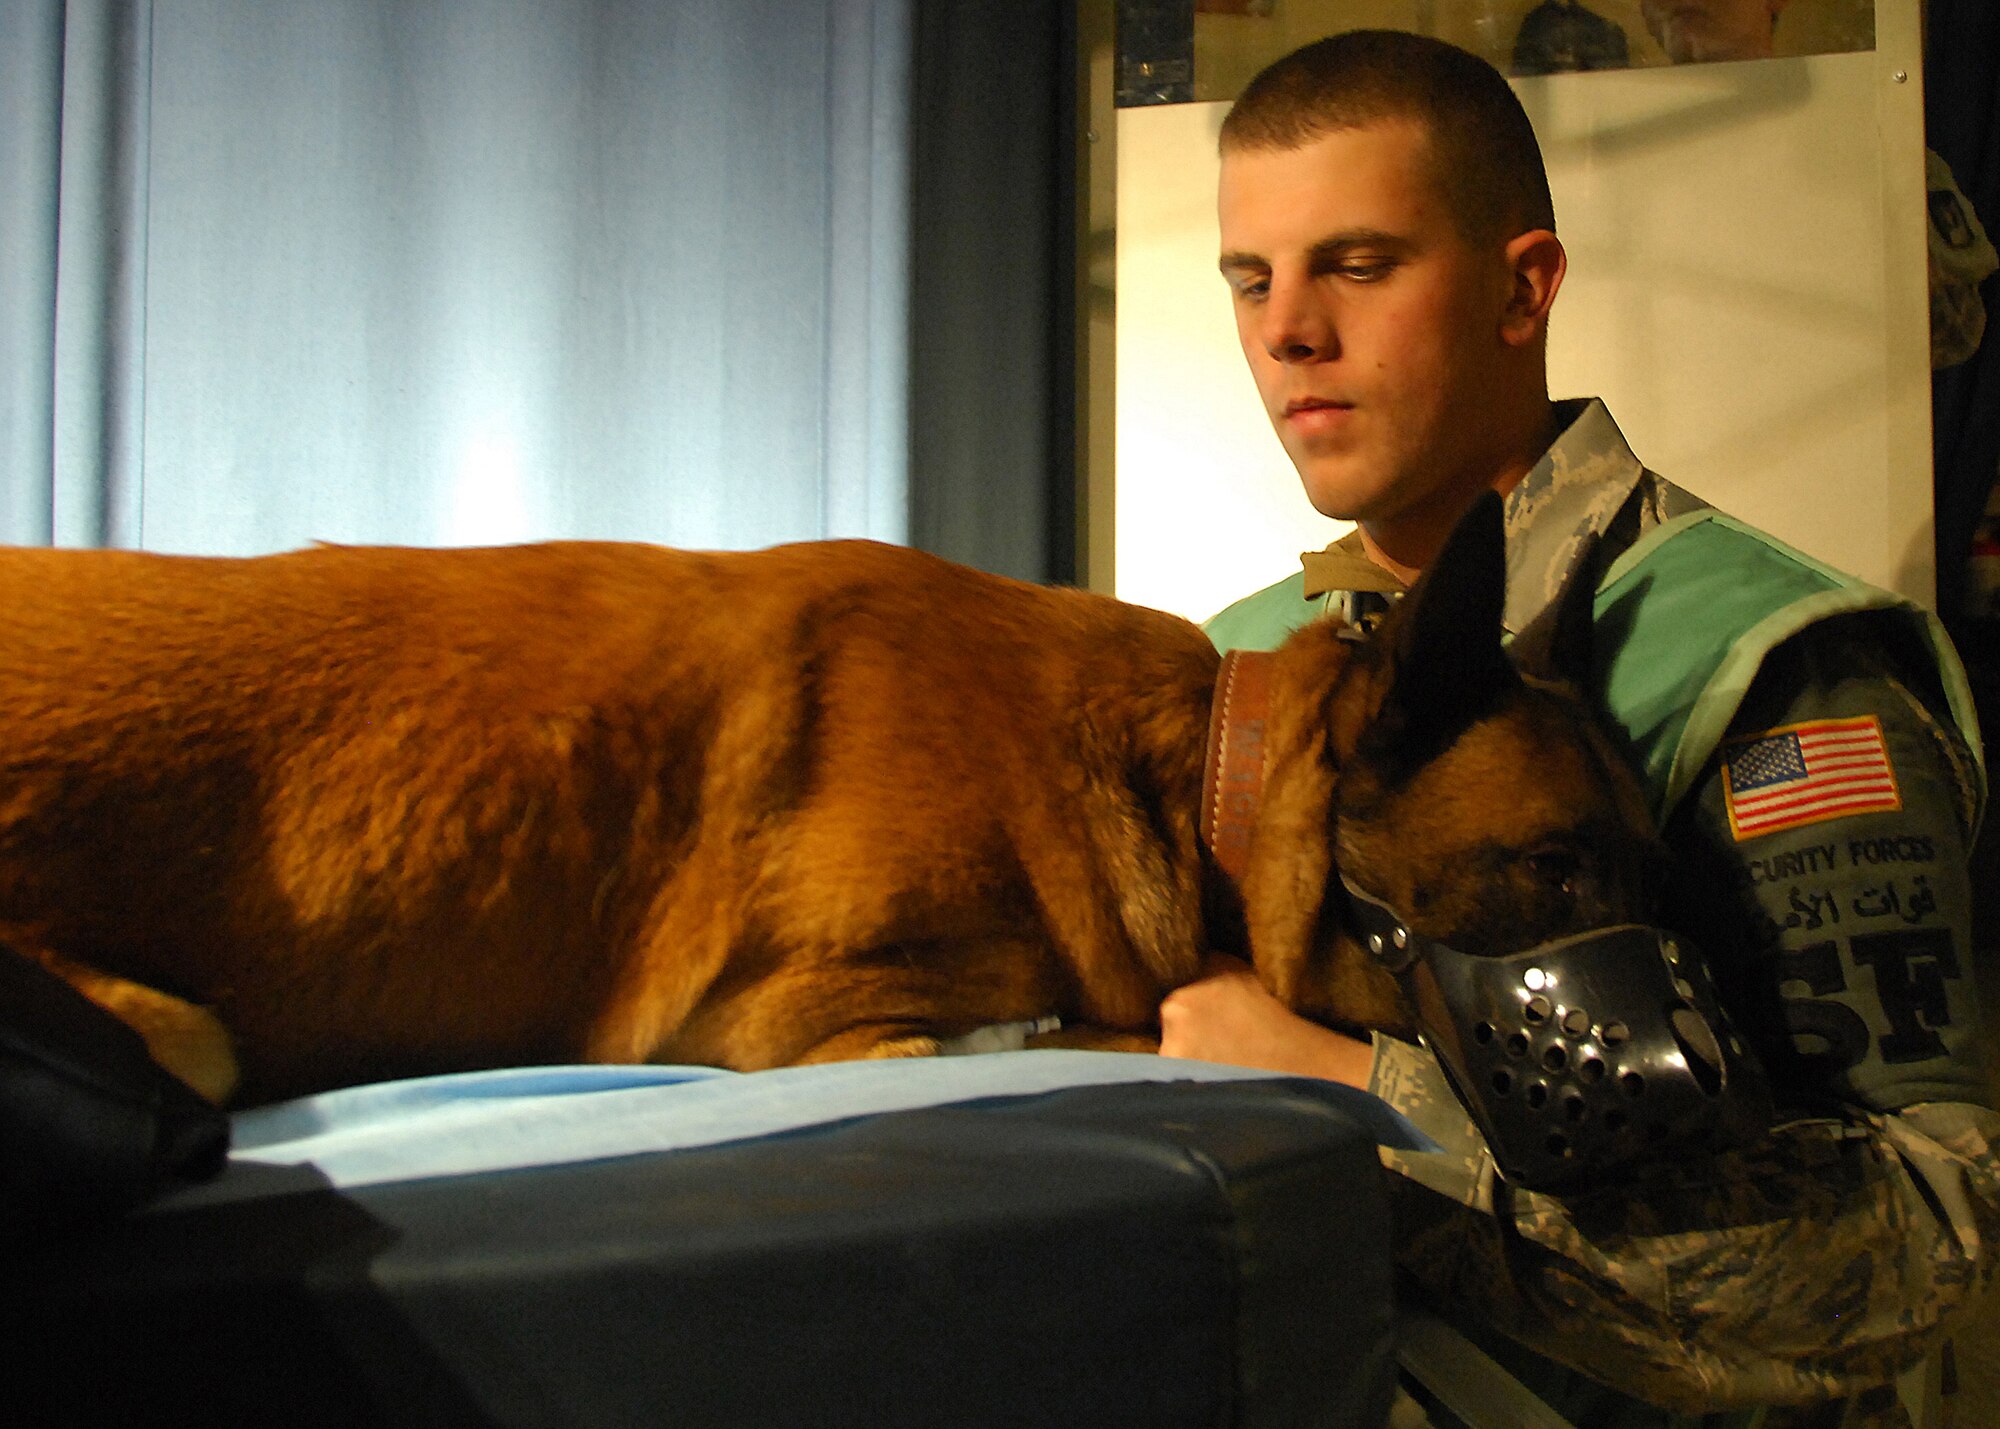 SOUTHWEST ASIA -- Senior Airman Daren Marshall, 386th Expeditionary Security Forces Squadron military working dog handler, comforts his K-9, Zack, during an X-ray session on Dec. 13 at an air base in Southwest Asia. Zack received an X-ray to see how his pneumonia has cleared since his last visit. Airman Marshall is assigned to the 386th Expeditionary Security Forces Squadron and is deployed from F.E. Warren Air Force Base, Wyo. (U.S. Air Force photo/ Tech. Sgt. Raheem Moore)